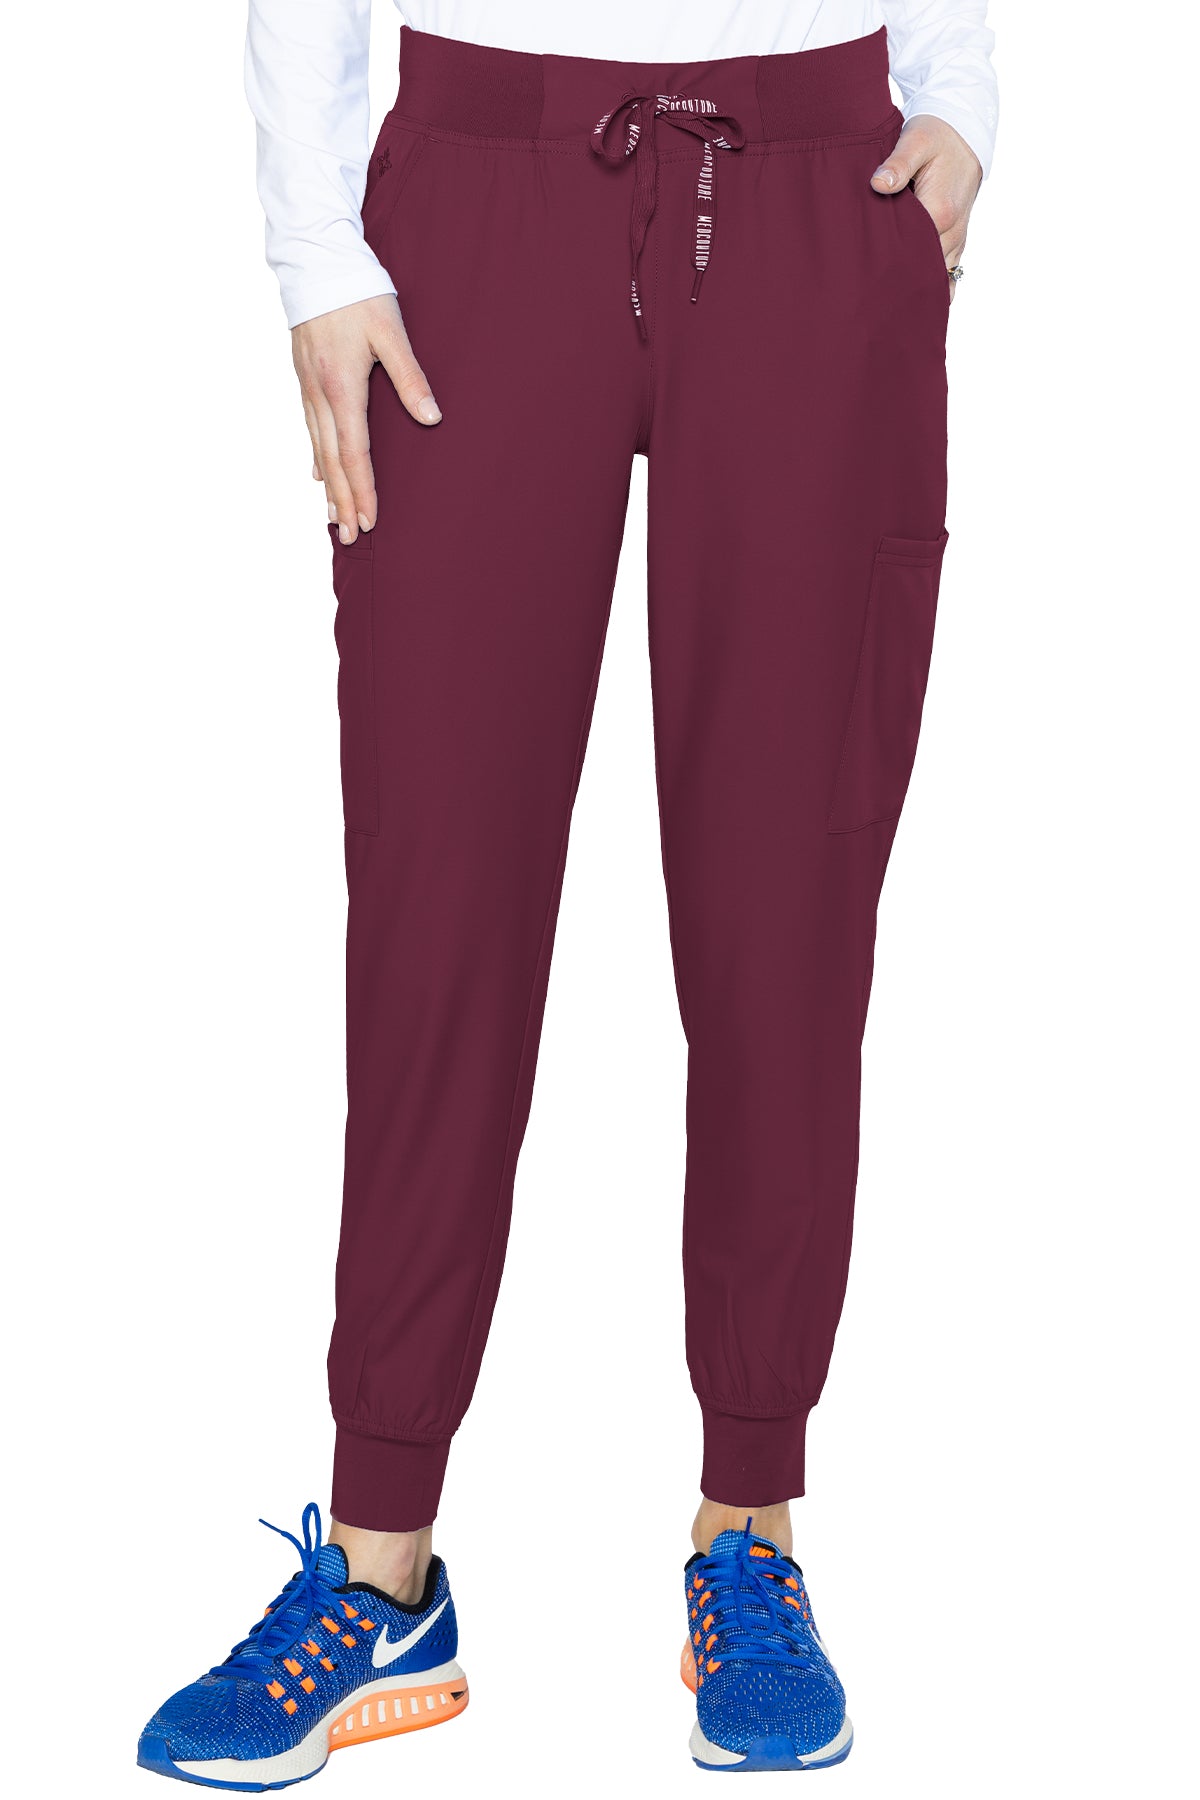 Med Couture 2711 Insight Jogger Pant Wine